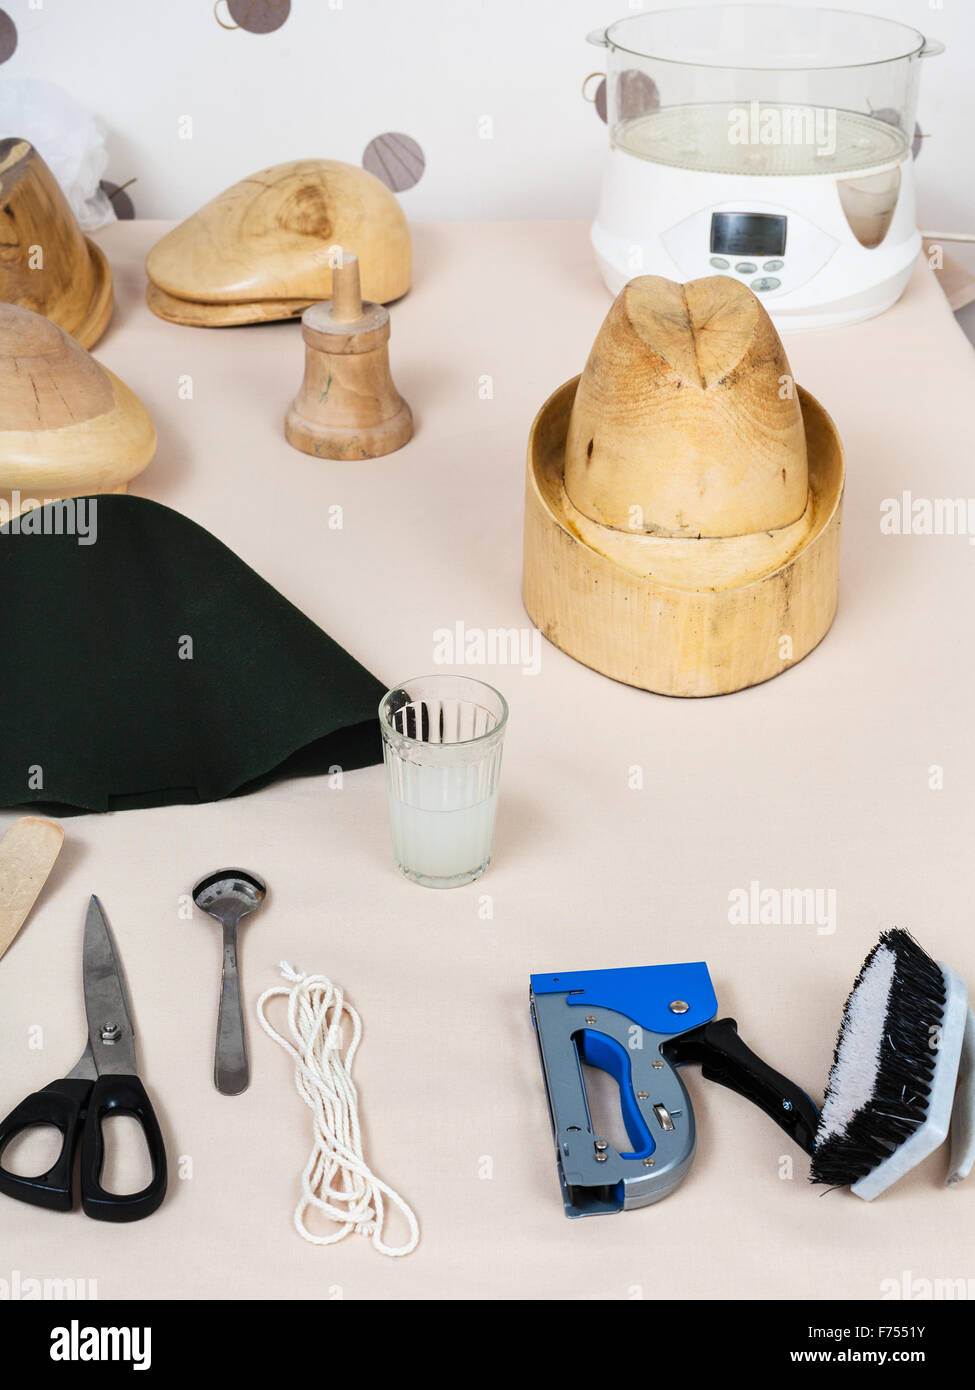 workshop for alpine felt hat making - tools and equipment for hatmaking on  table Stock Photo - Alamy